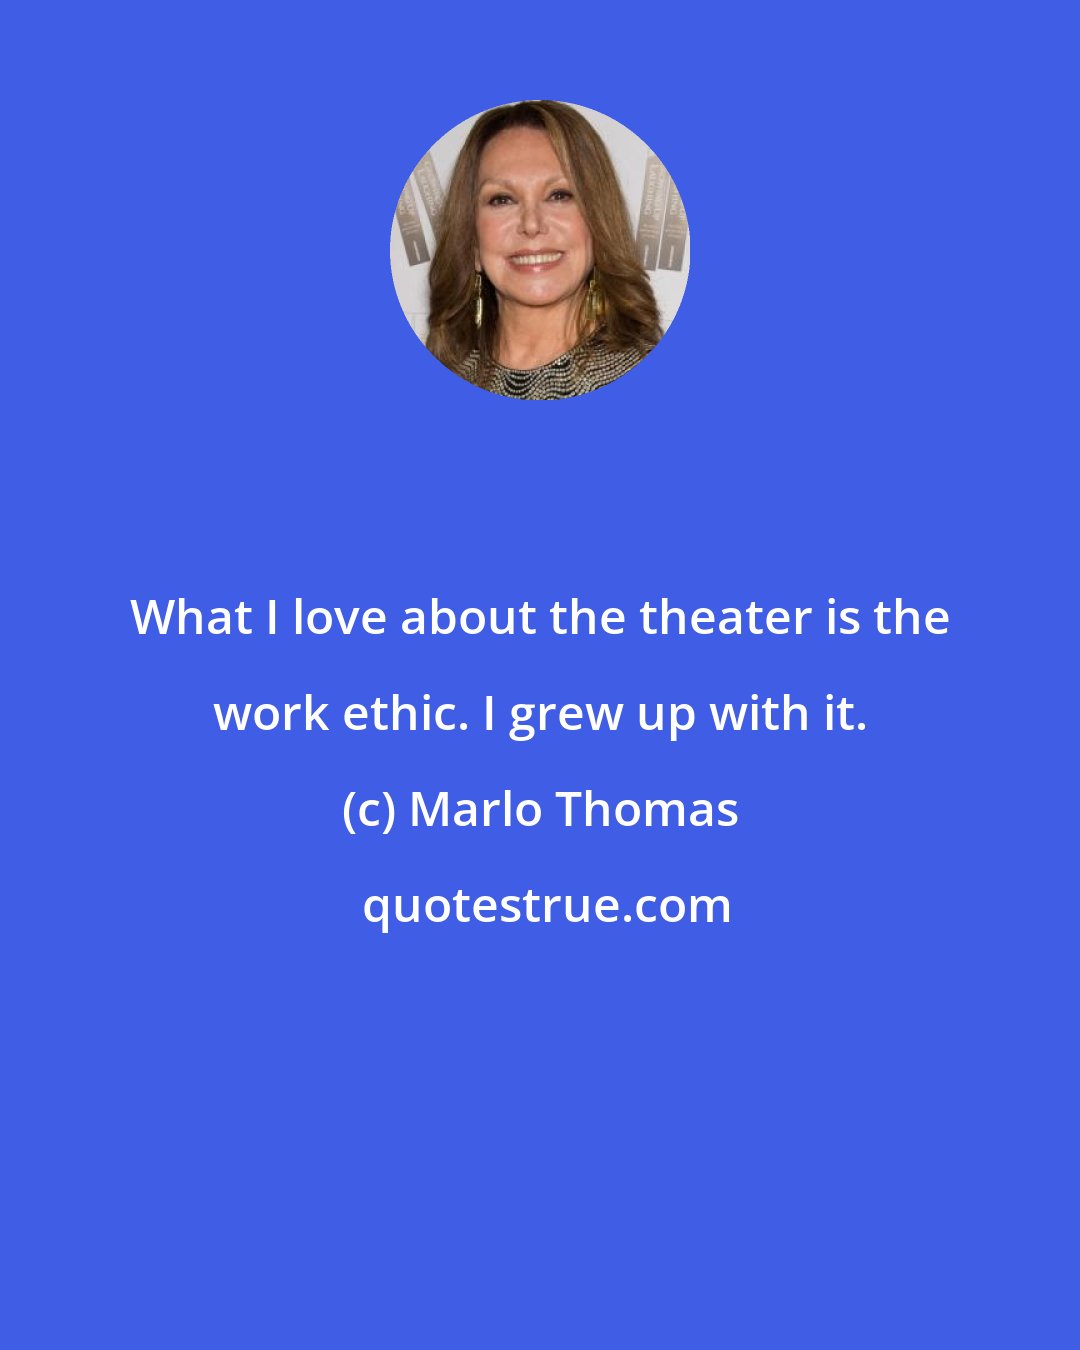 Marlo Thomas: What I love about the theater is the work ethic. I grew up with it.